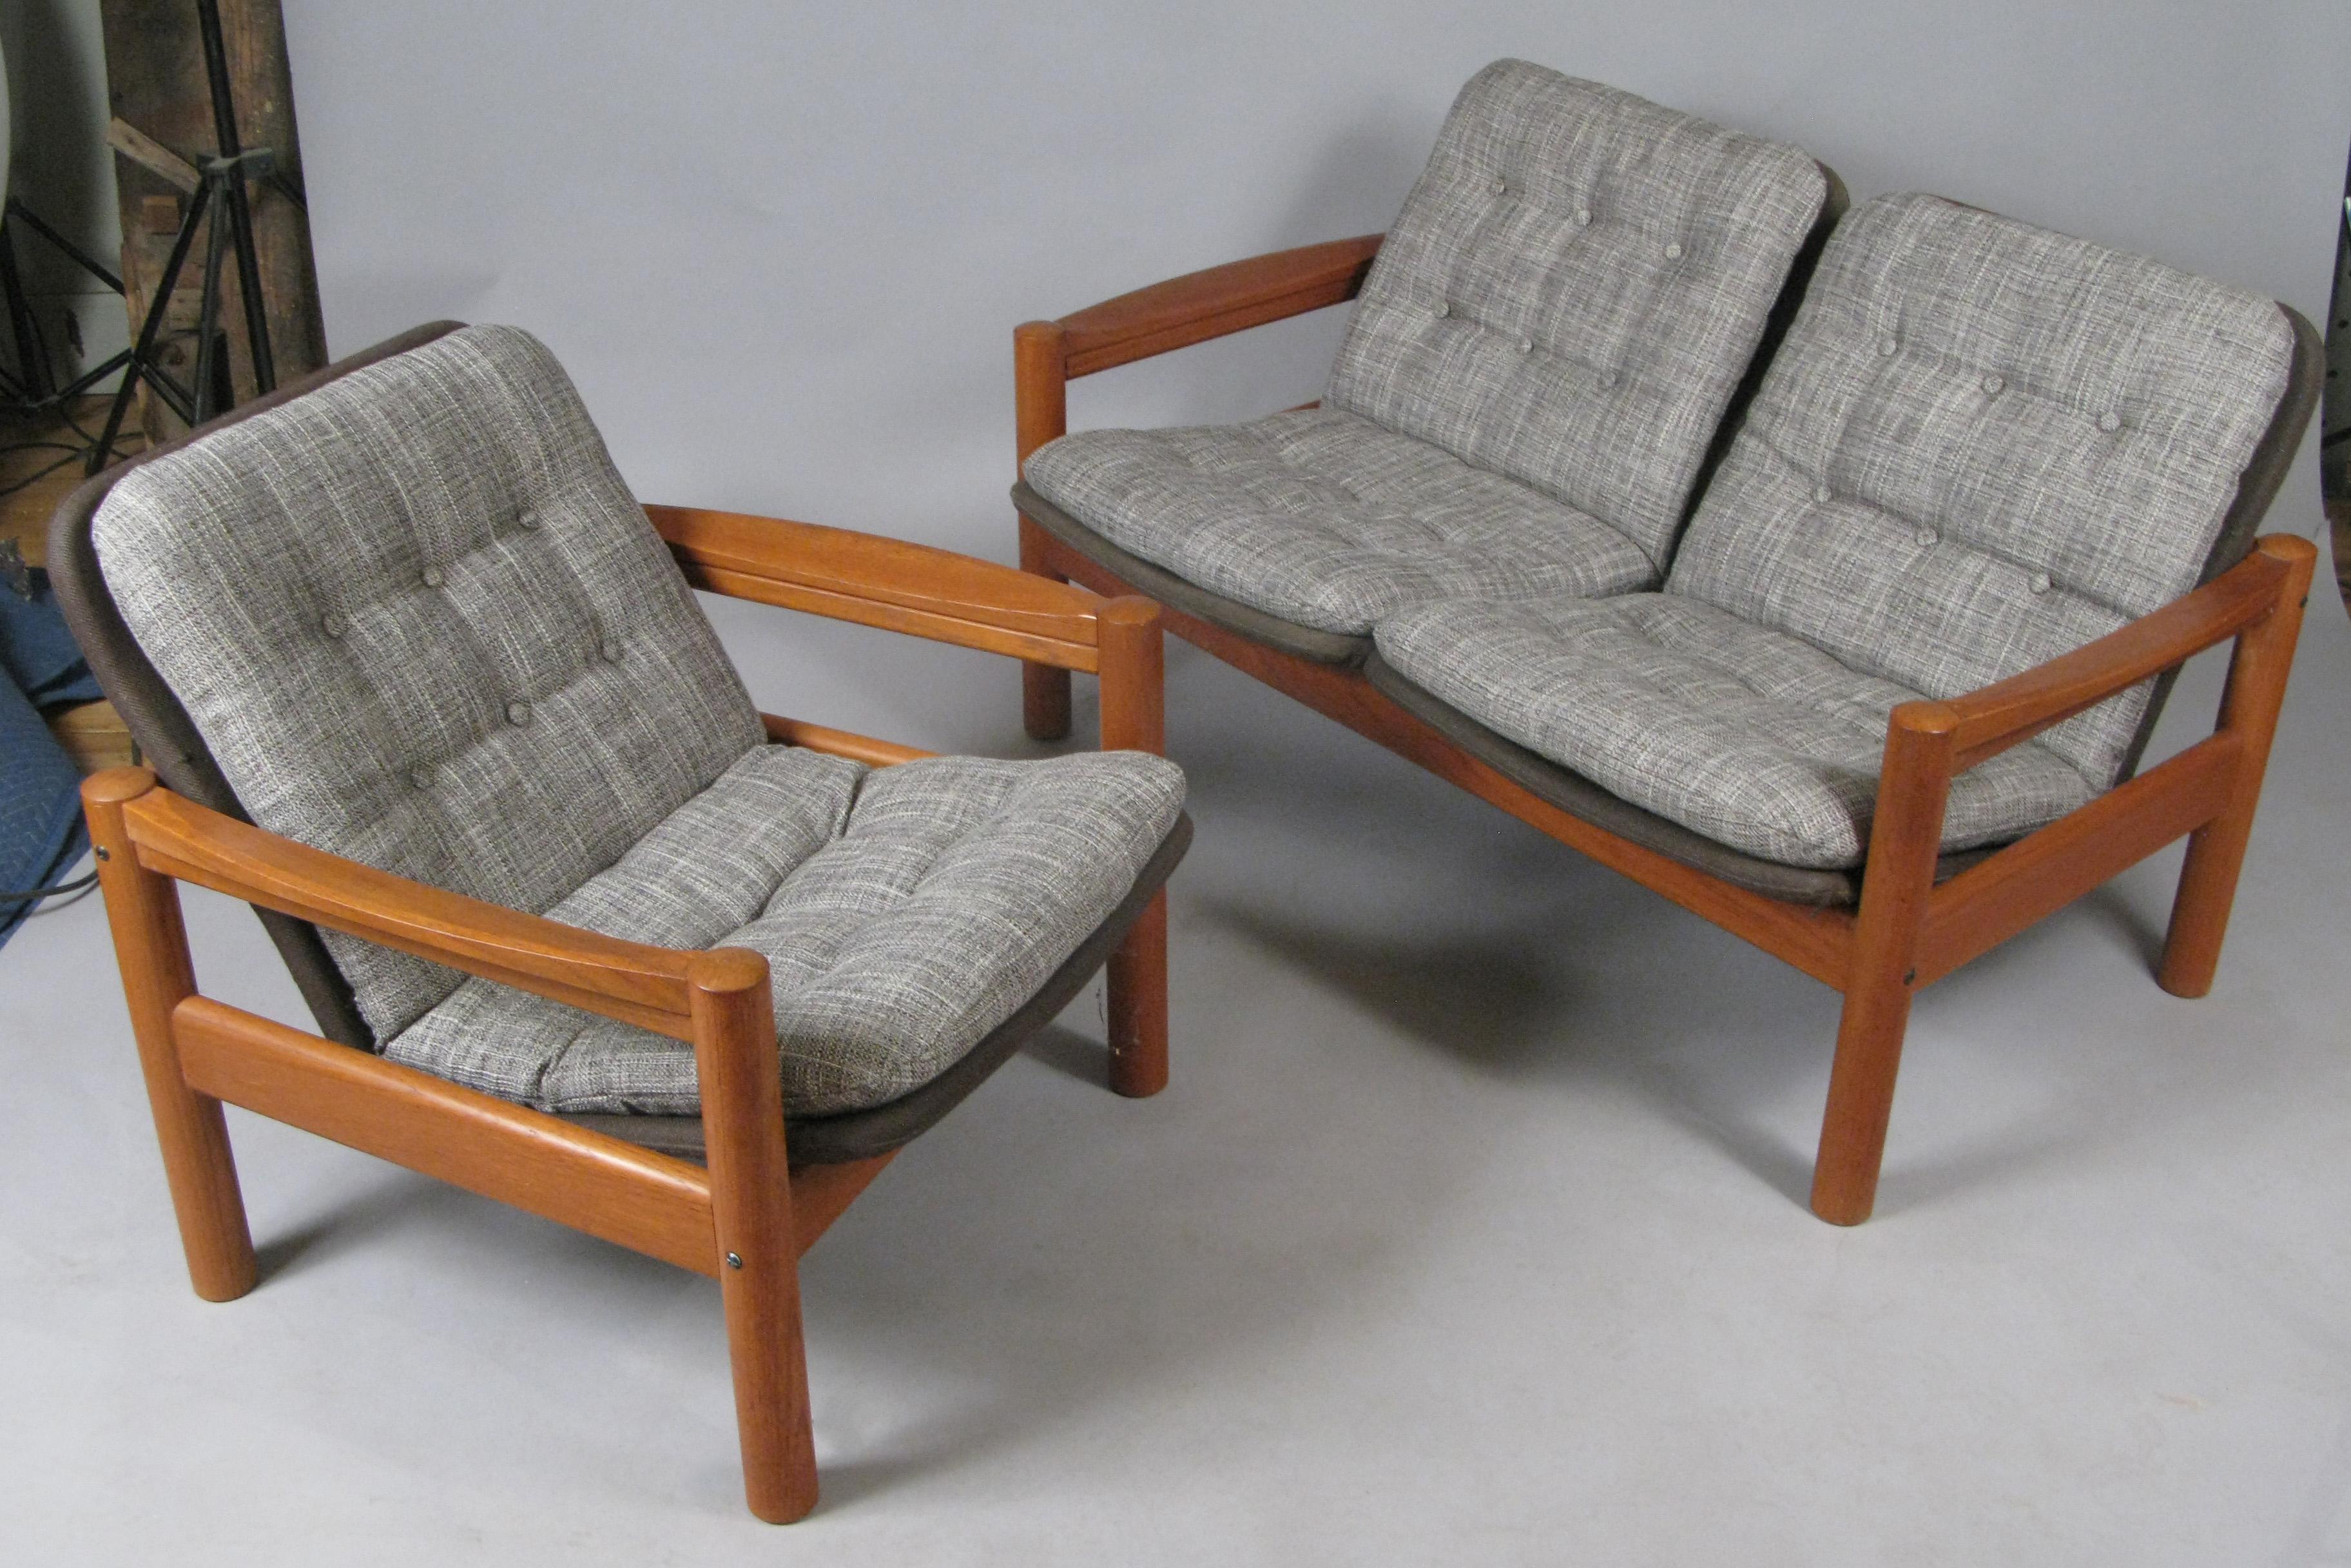 Late 20th Century 1970s Danish Teak Lounge Chair by Domino Møbler